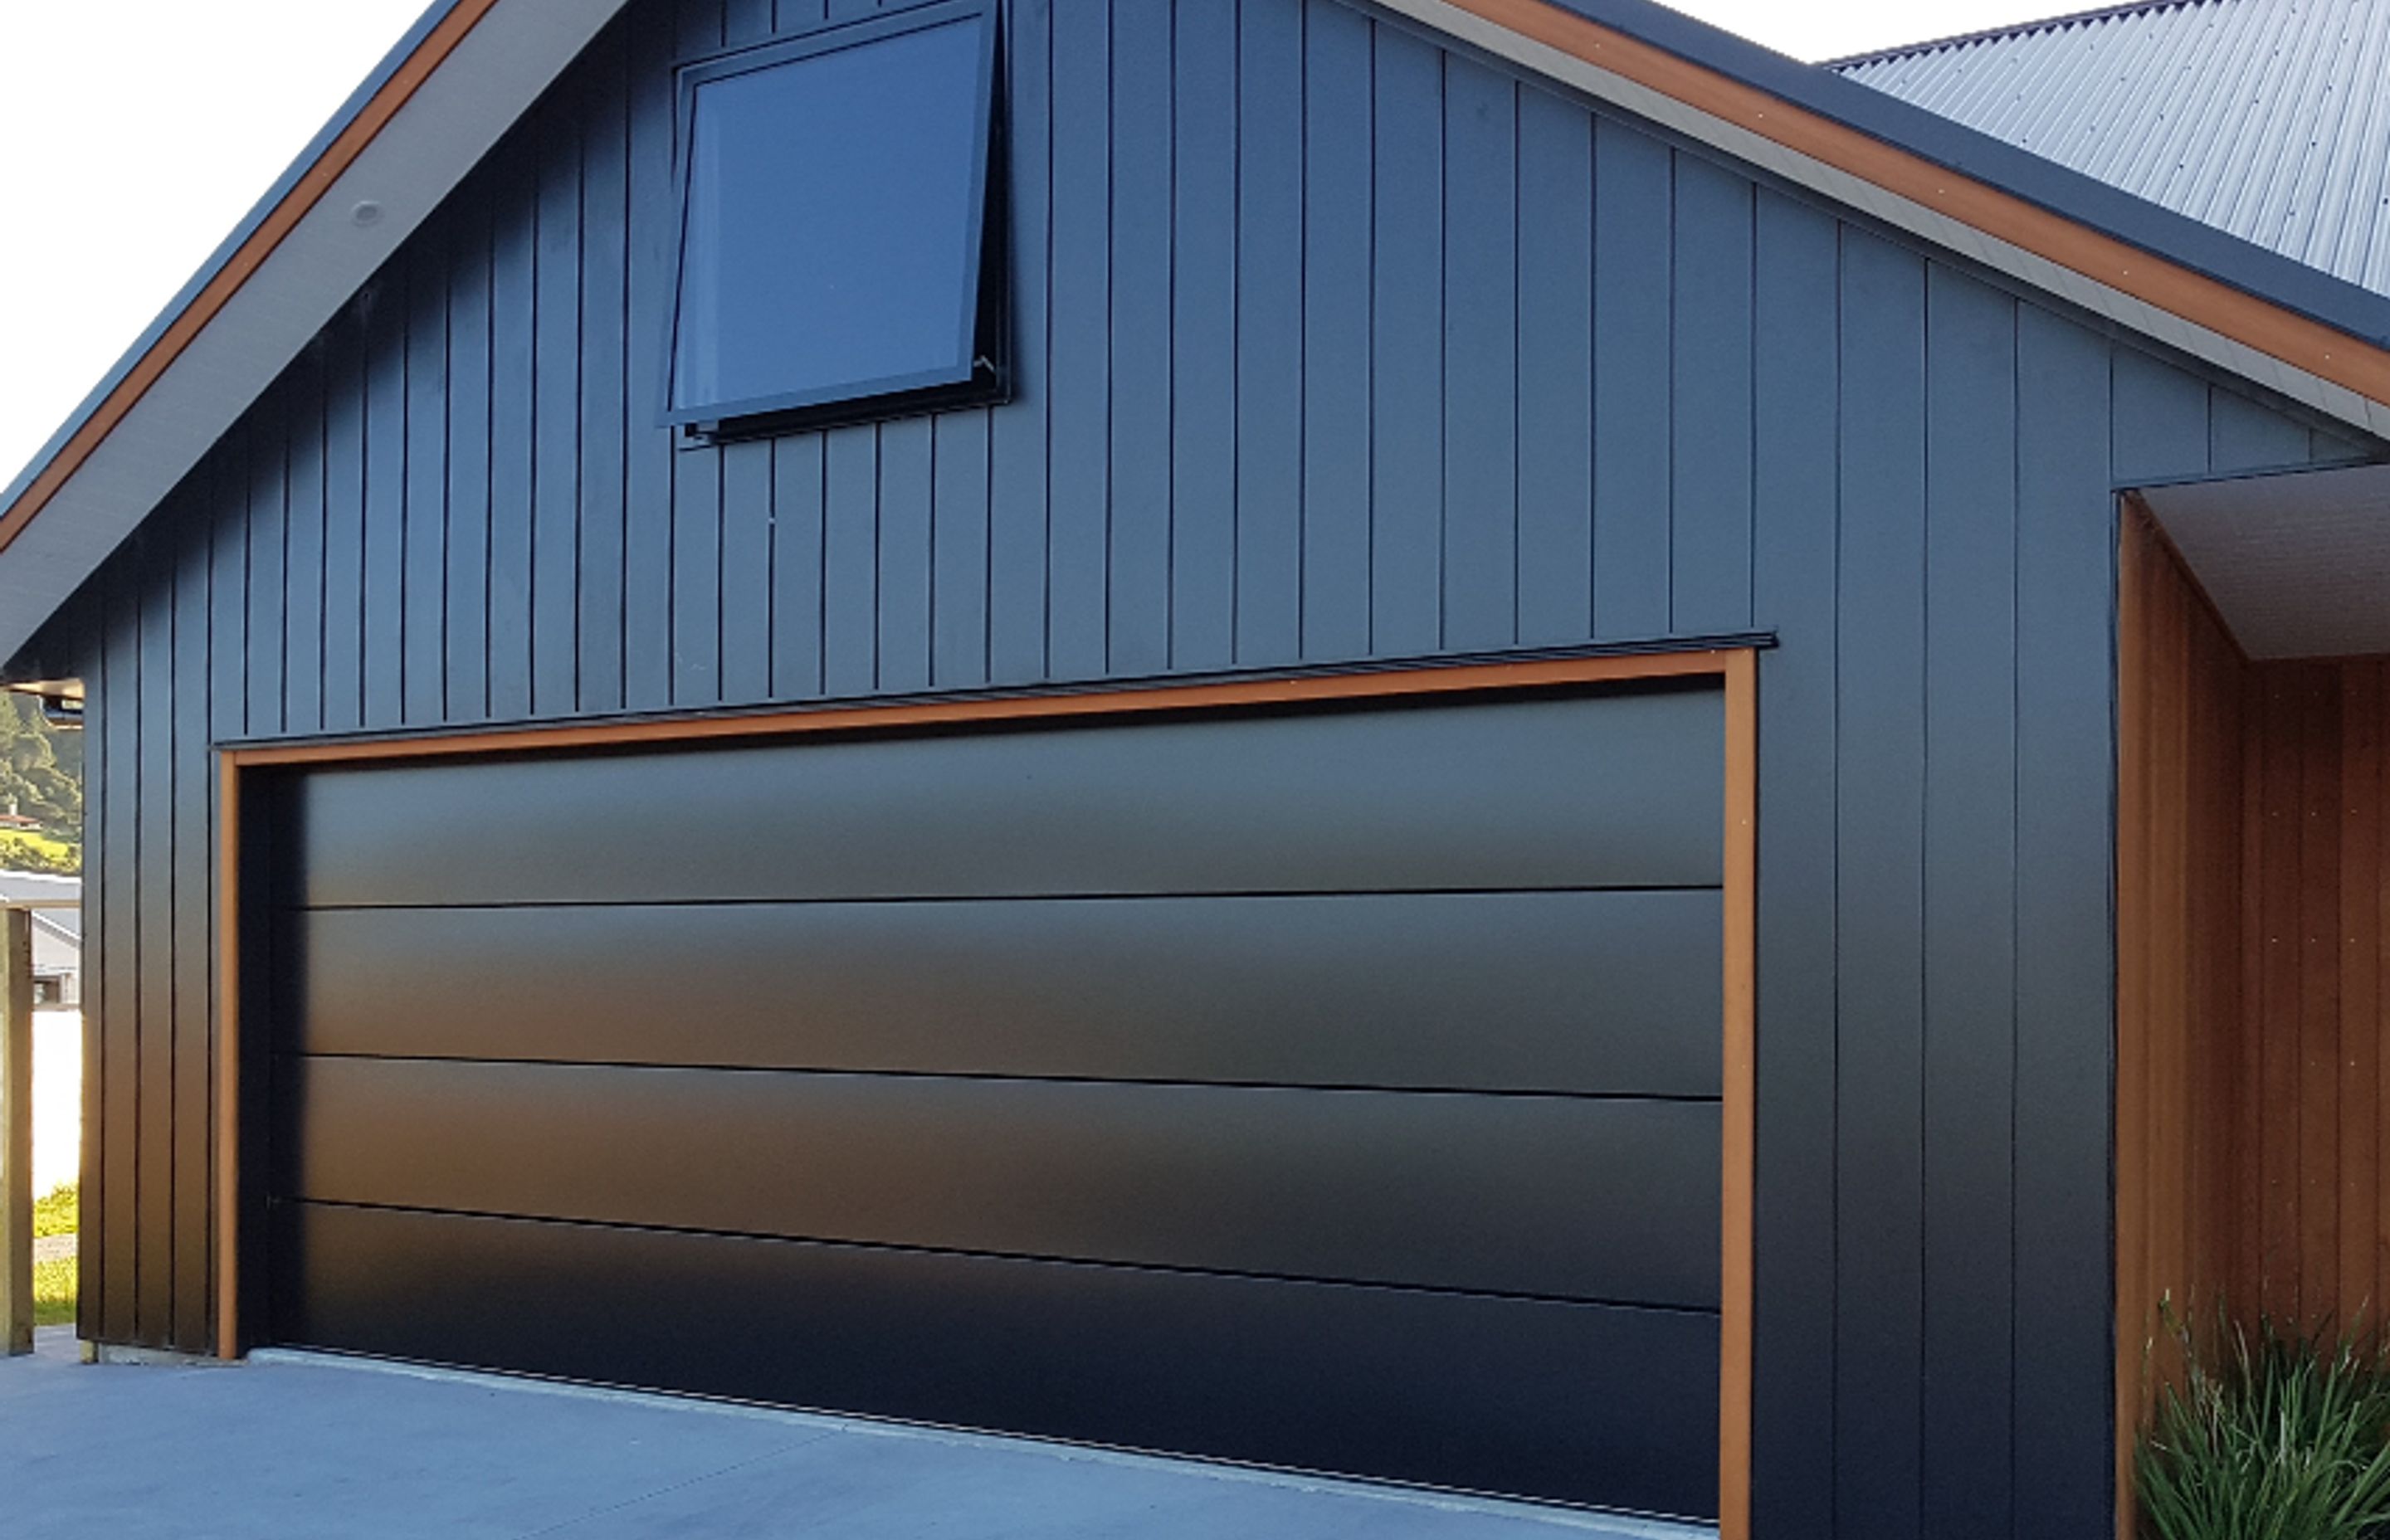 Dominator Nevada is a modern, minimalist steel sectional garage door with the added feature of negative detailing to produce bold horizontal lines that meet the demands of current home design trends.